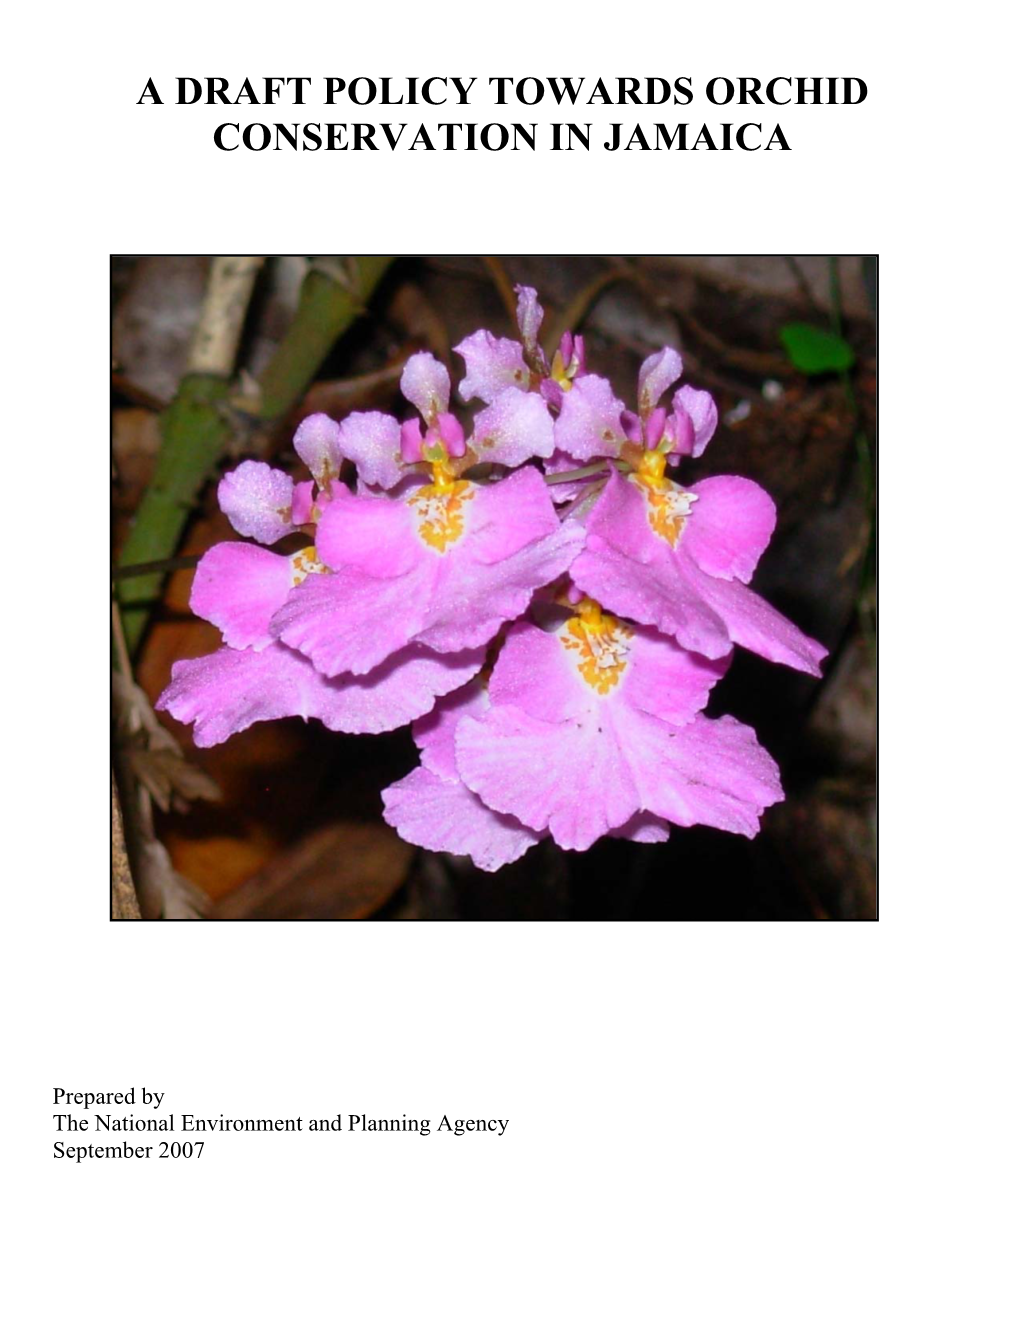 A Draft Policy Towards Orchid Conservation in Jamaica